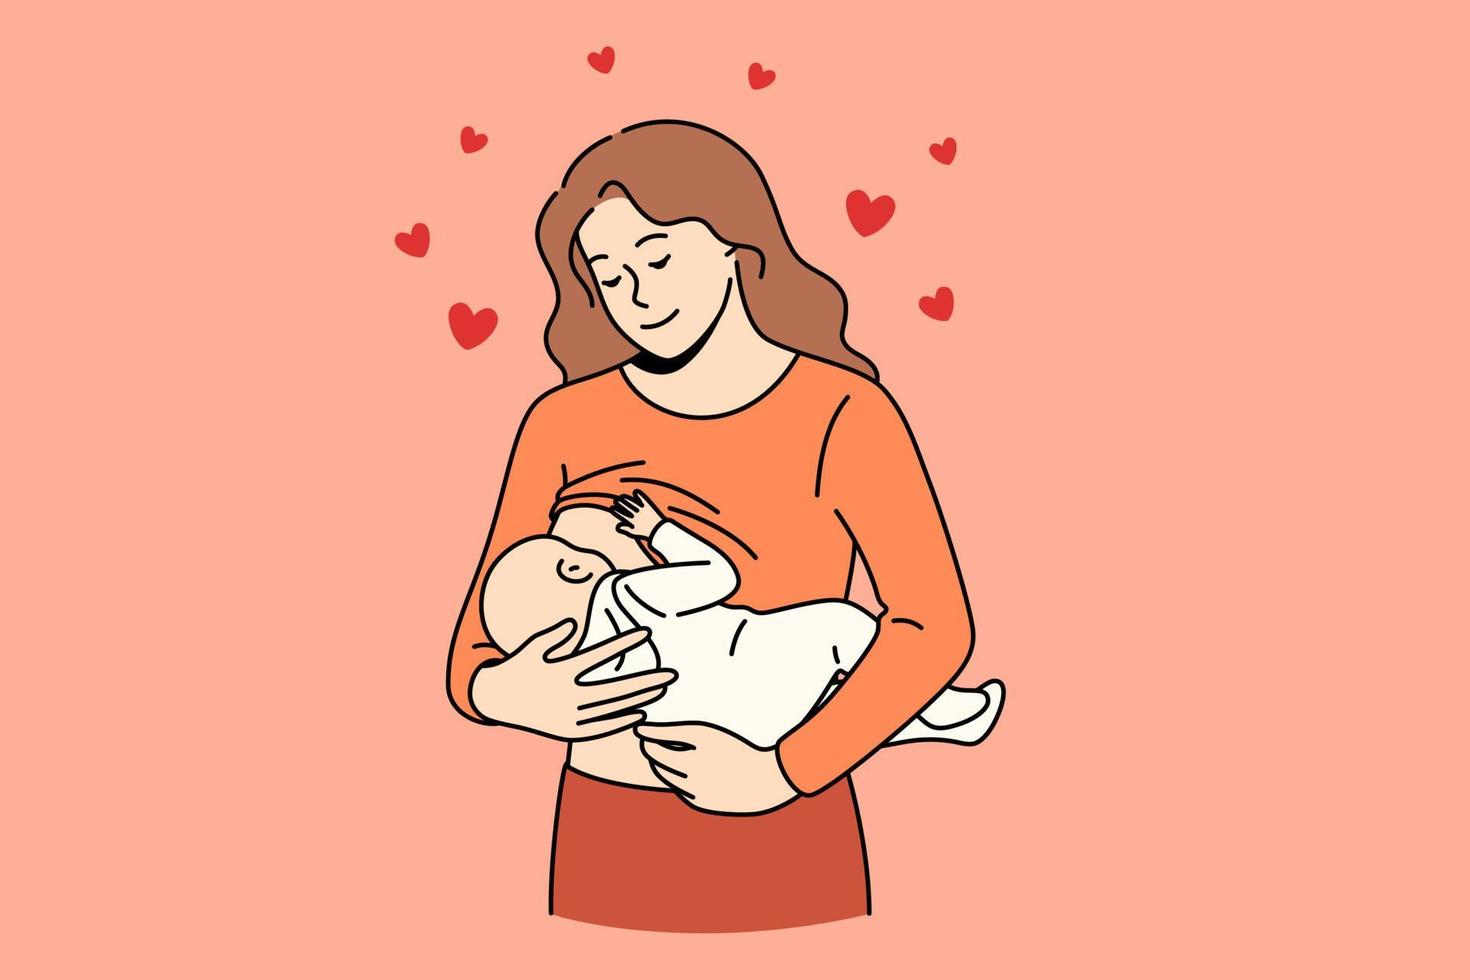 Happy motherhood and breastfeeding concept. Young happy loving smiling woman mother cartoon character standing holding her infant newborn baby breastfeeding vector illustration